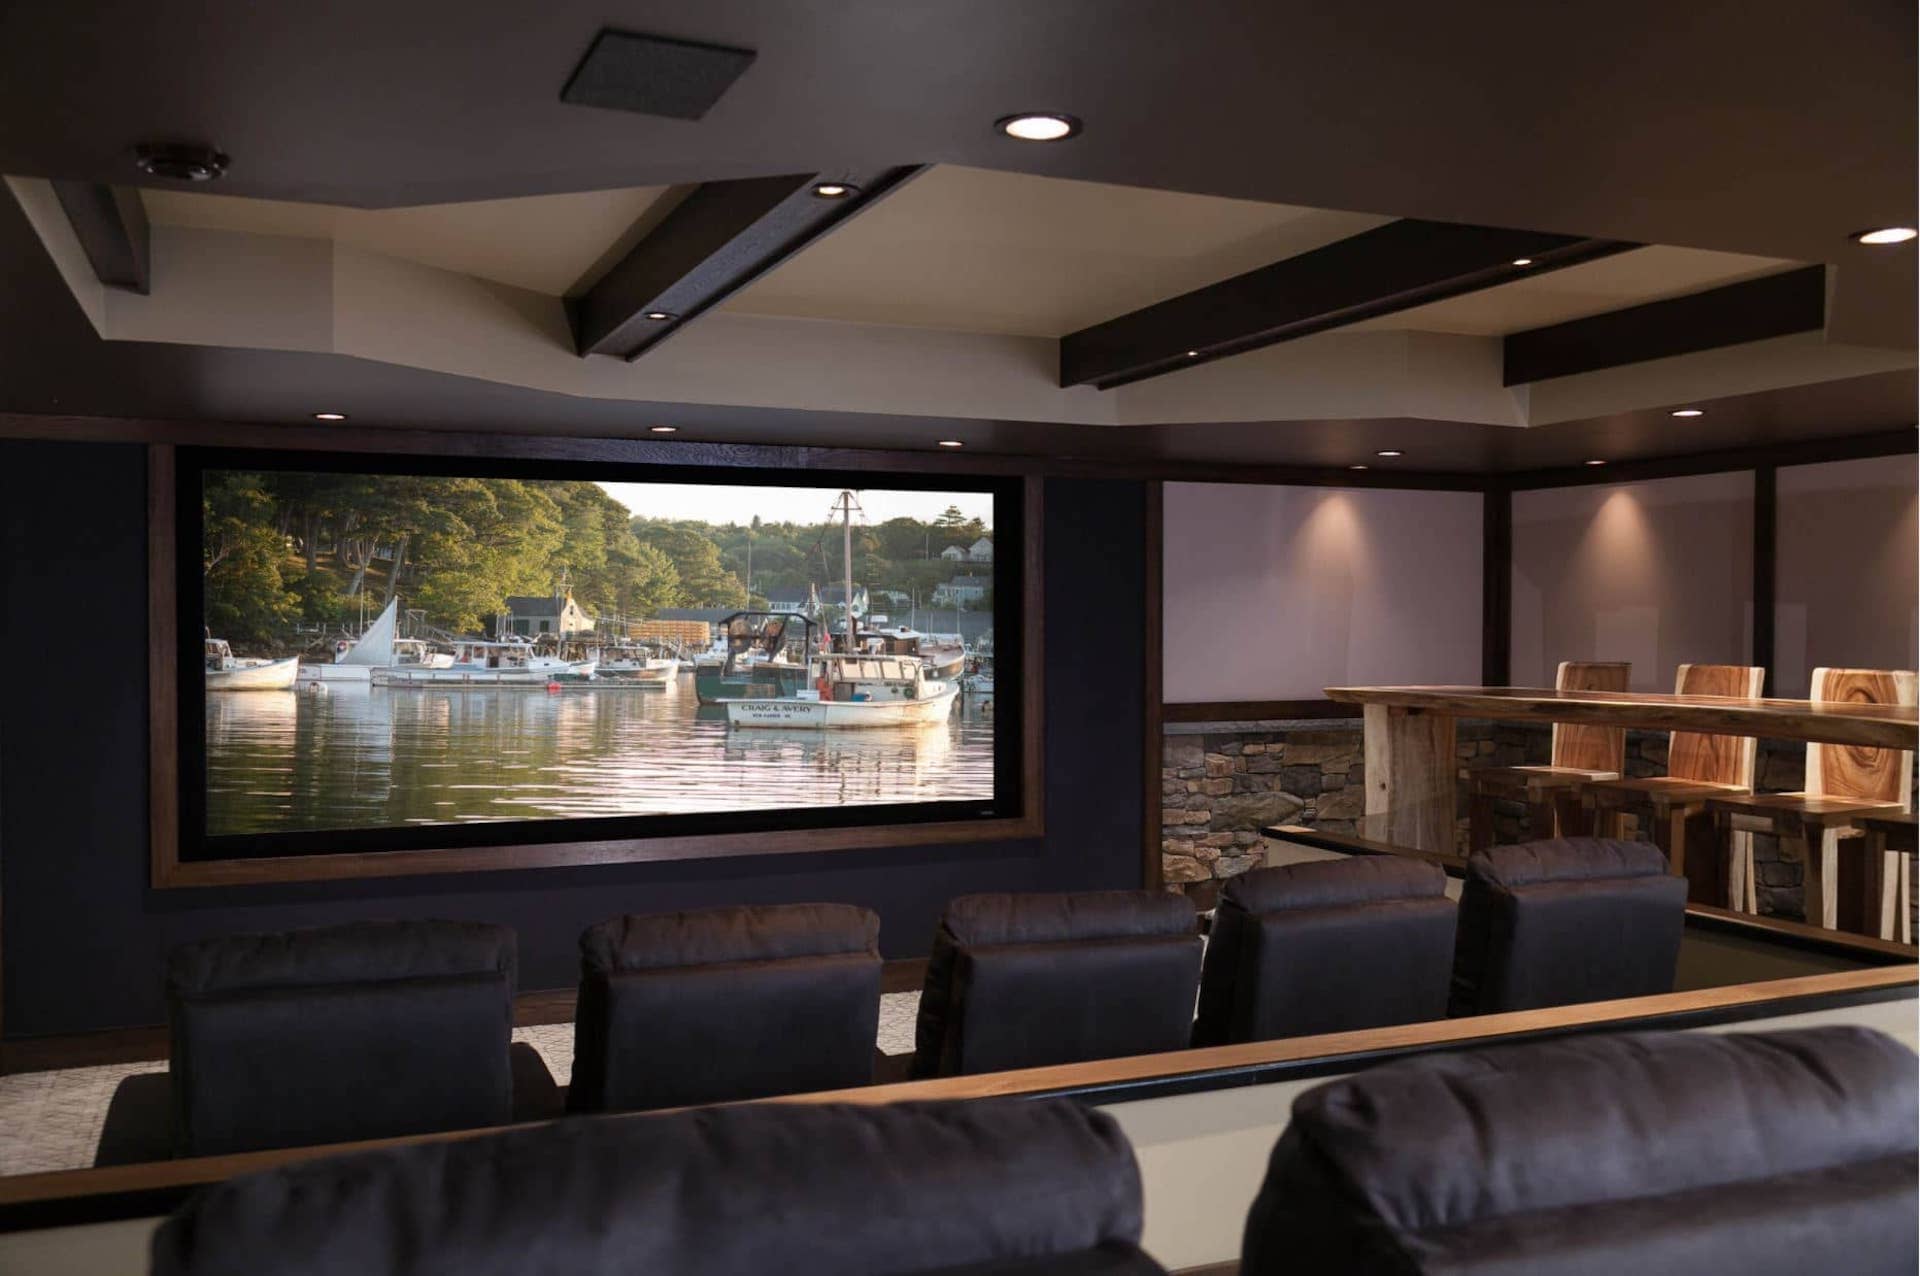 In this Maryland home theater, high quality visuals and a comfortable environment make the experience.